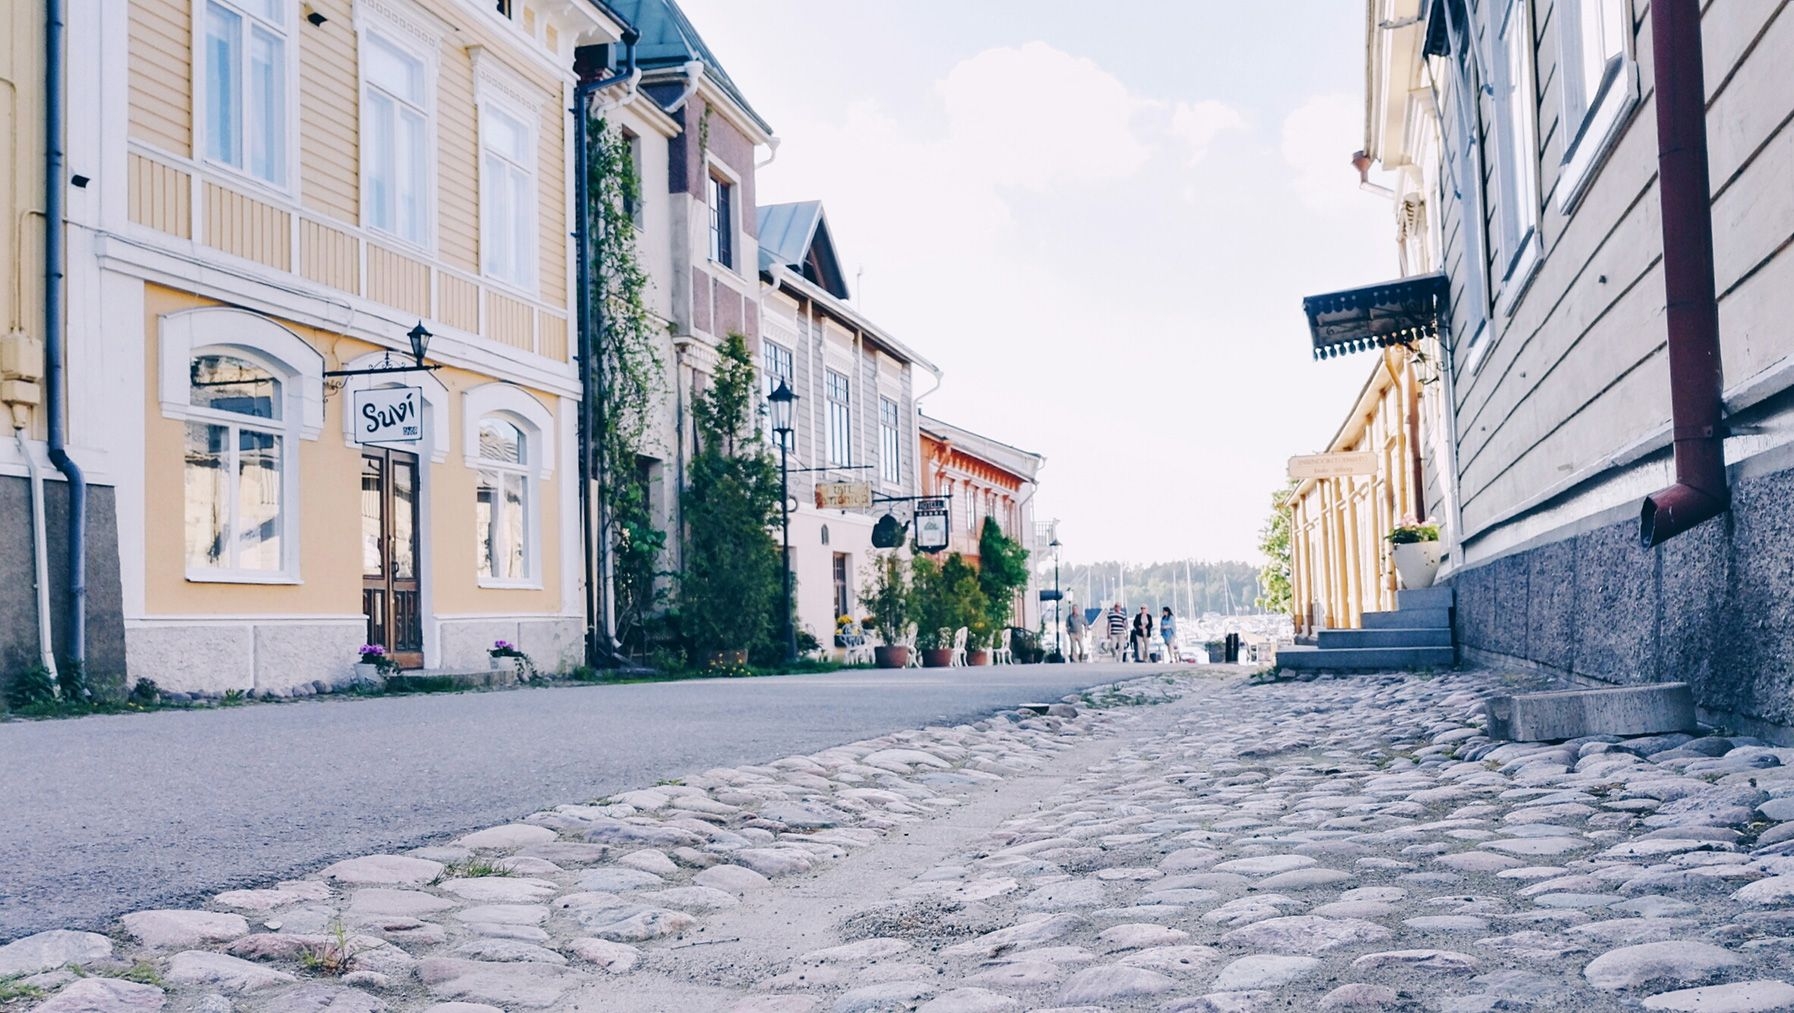 A cobblestone street in Naantali's Old Town, lined with pastel-coloured wooden buildings.